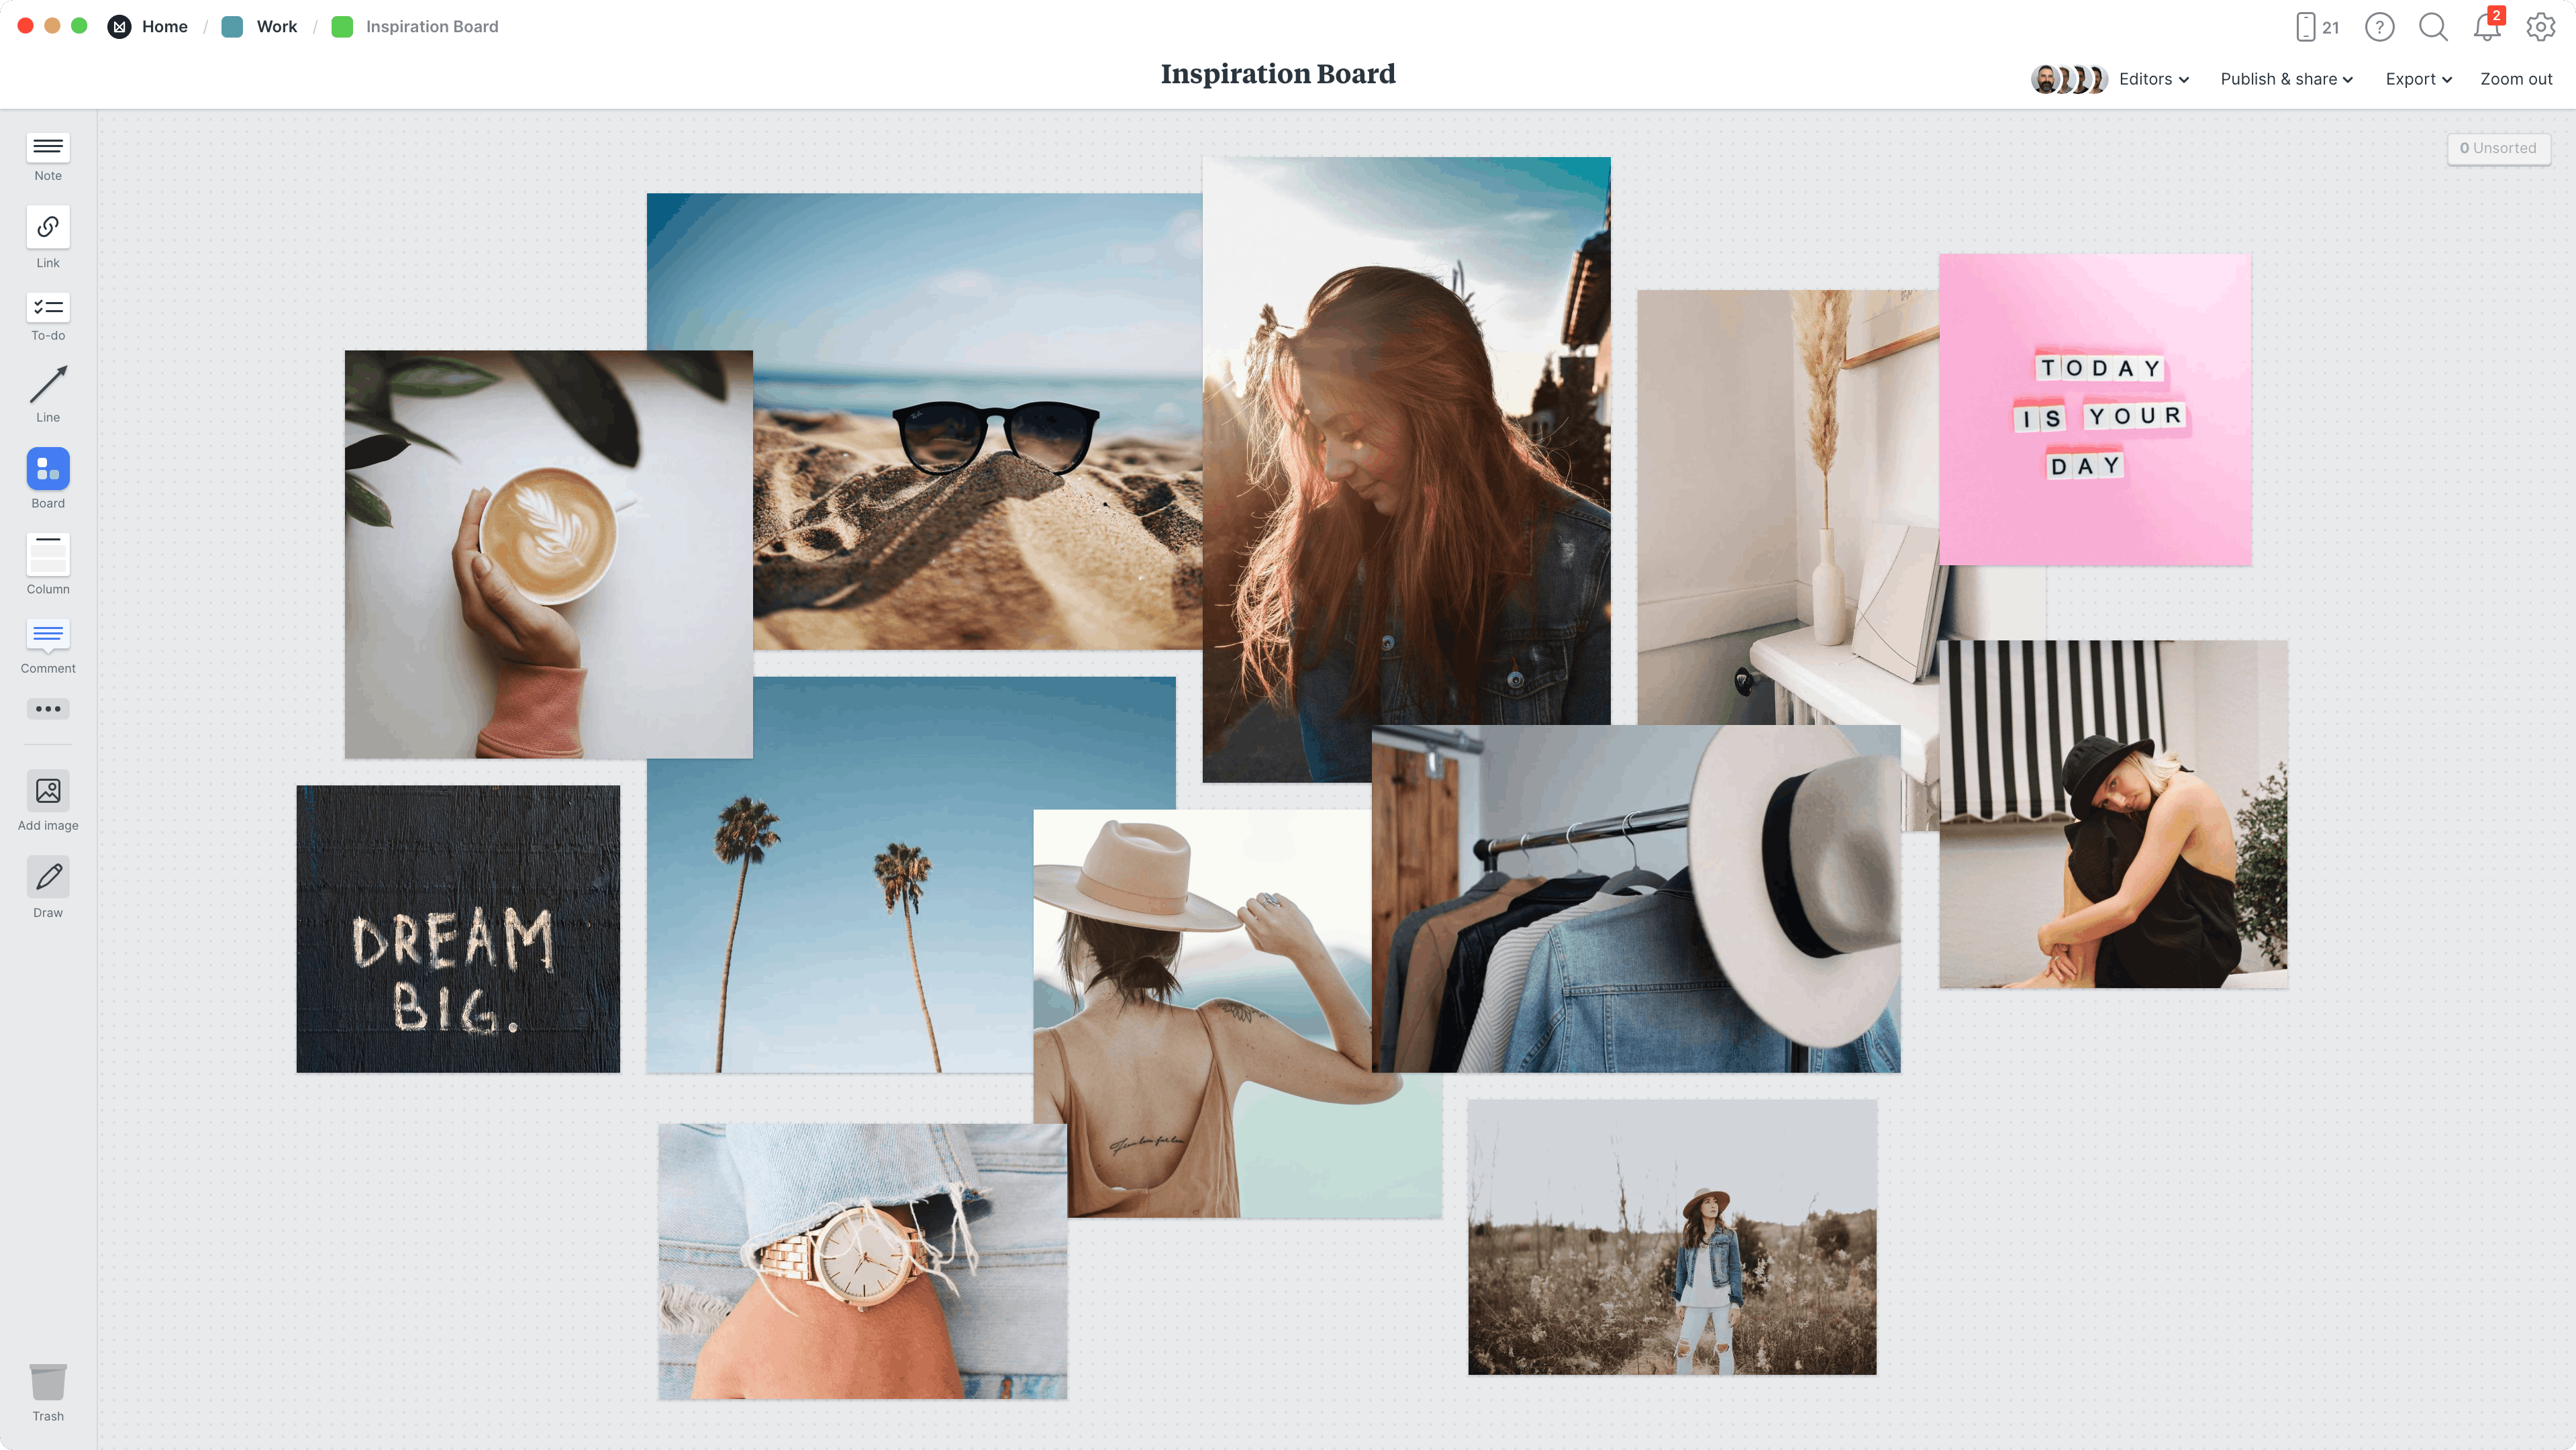 Inspiration Board Template, within the Milanote app